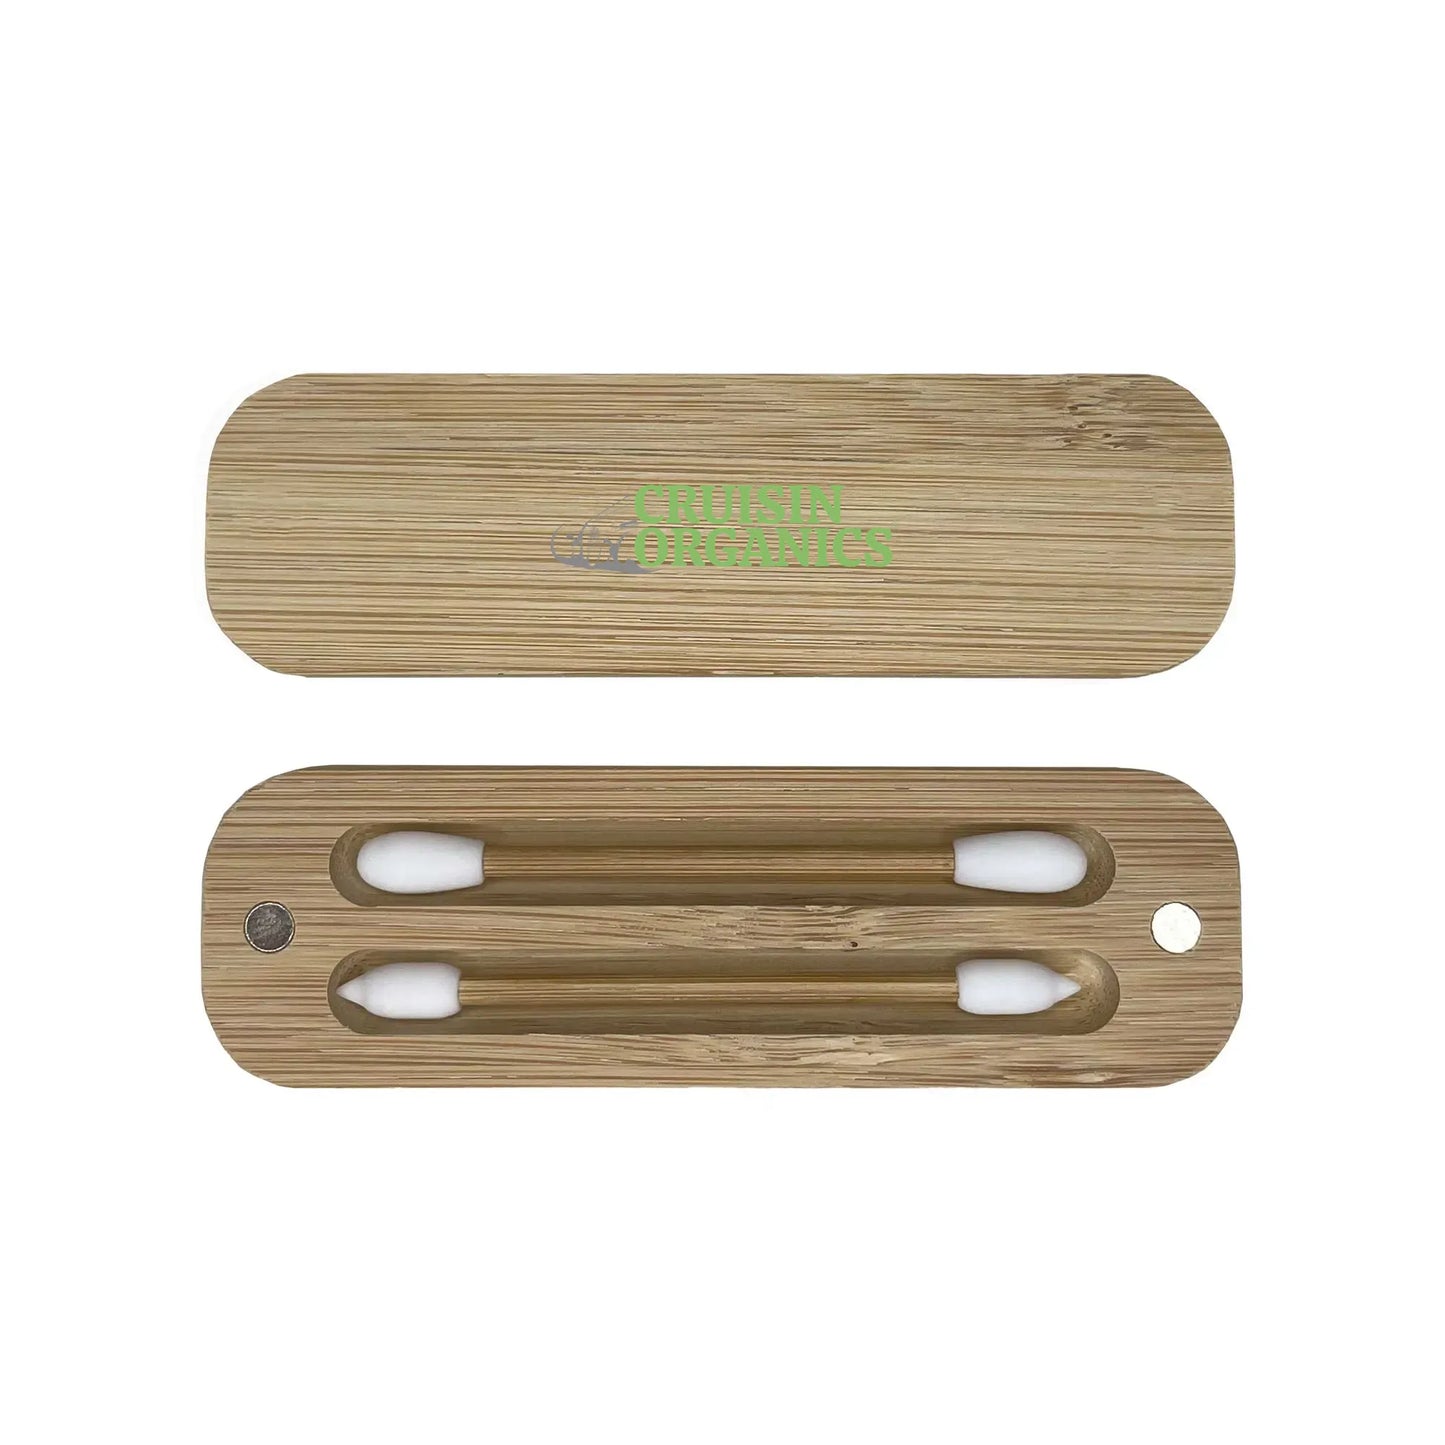 Introducing Cruisin Organics Bamboo Carrying Case for Reusable Makeup Swabs! Made with eco-friendly silicone and sturdy bamboo sticks, these dual-tip swabs are perfect for all skin types. They are reusable, easy to clean, and come with a portable bamboo case for travel - no more plastic swabs!